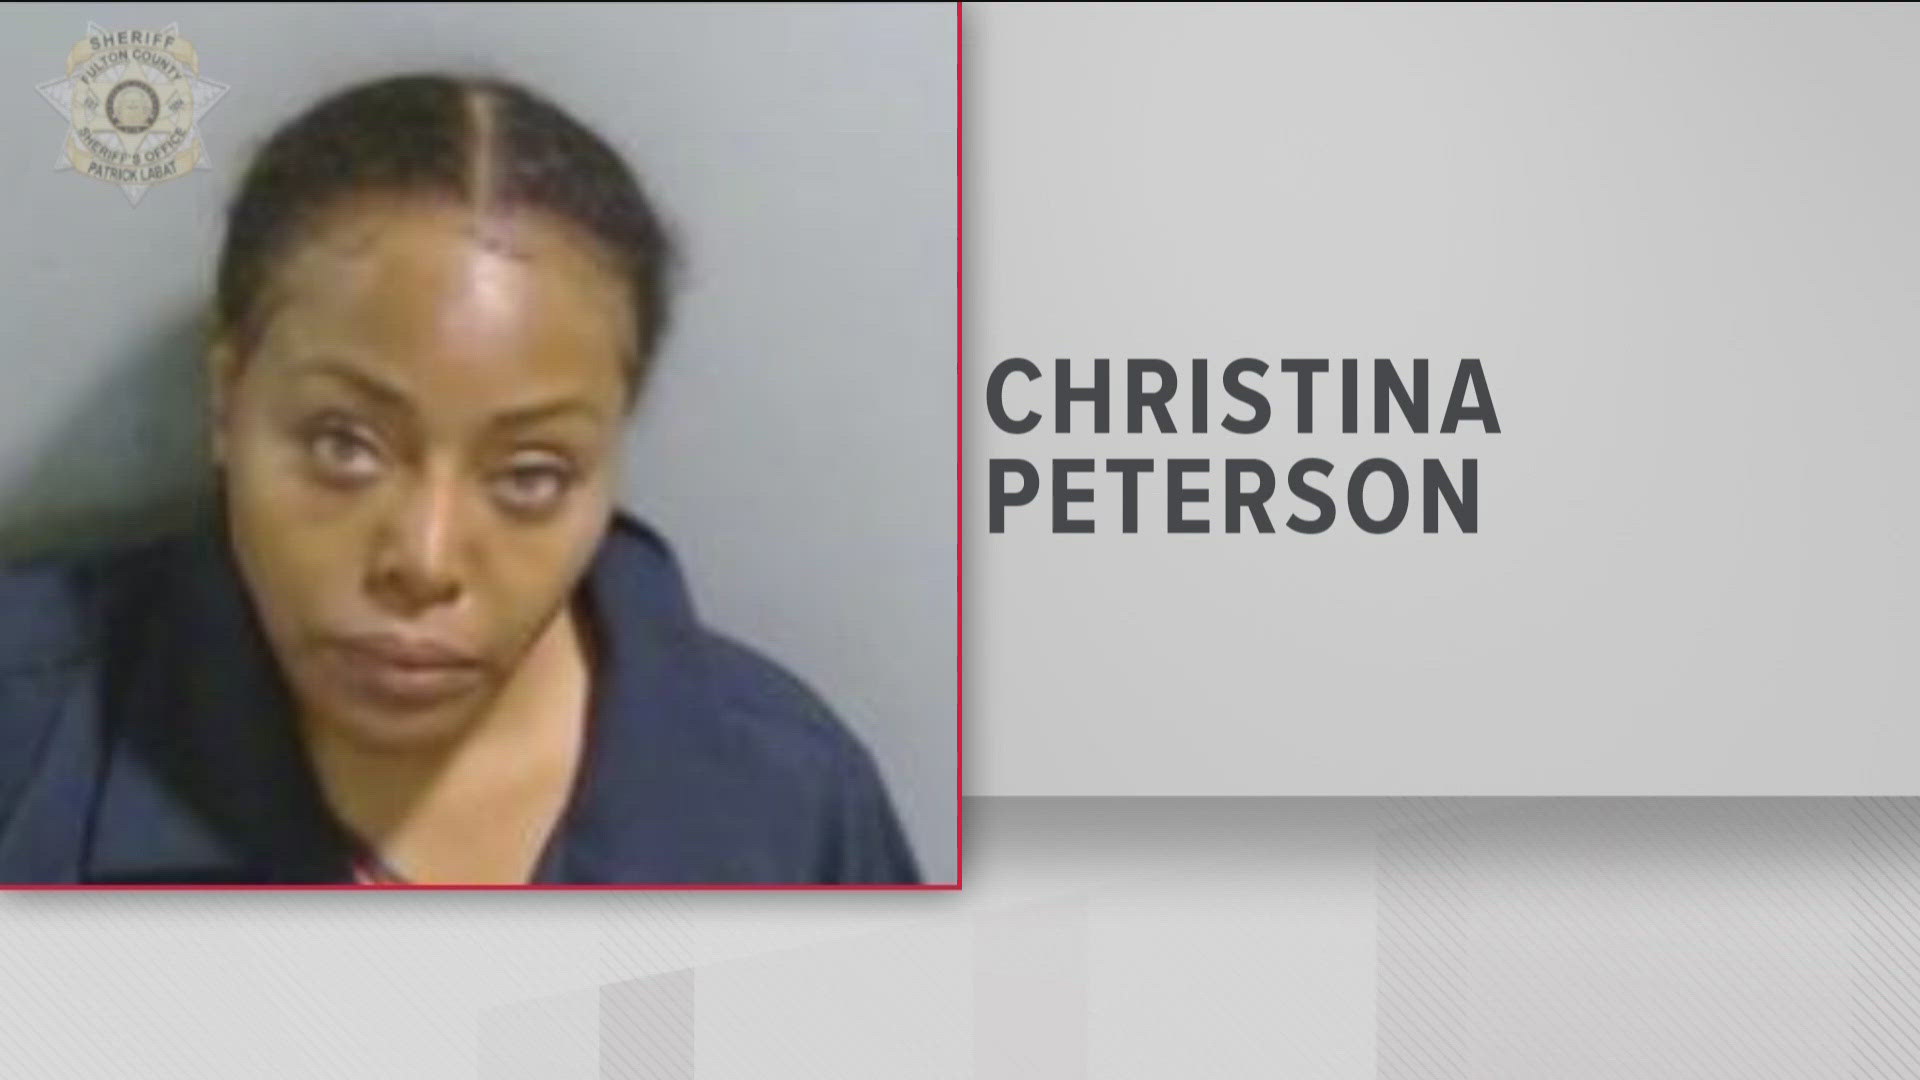 Records show Christina J. Peterson was booked into the Fulton County Jail on Thursday.  She is being charged with a felony.